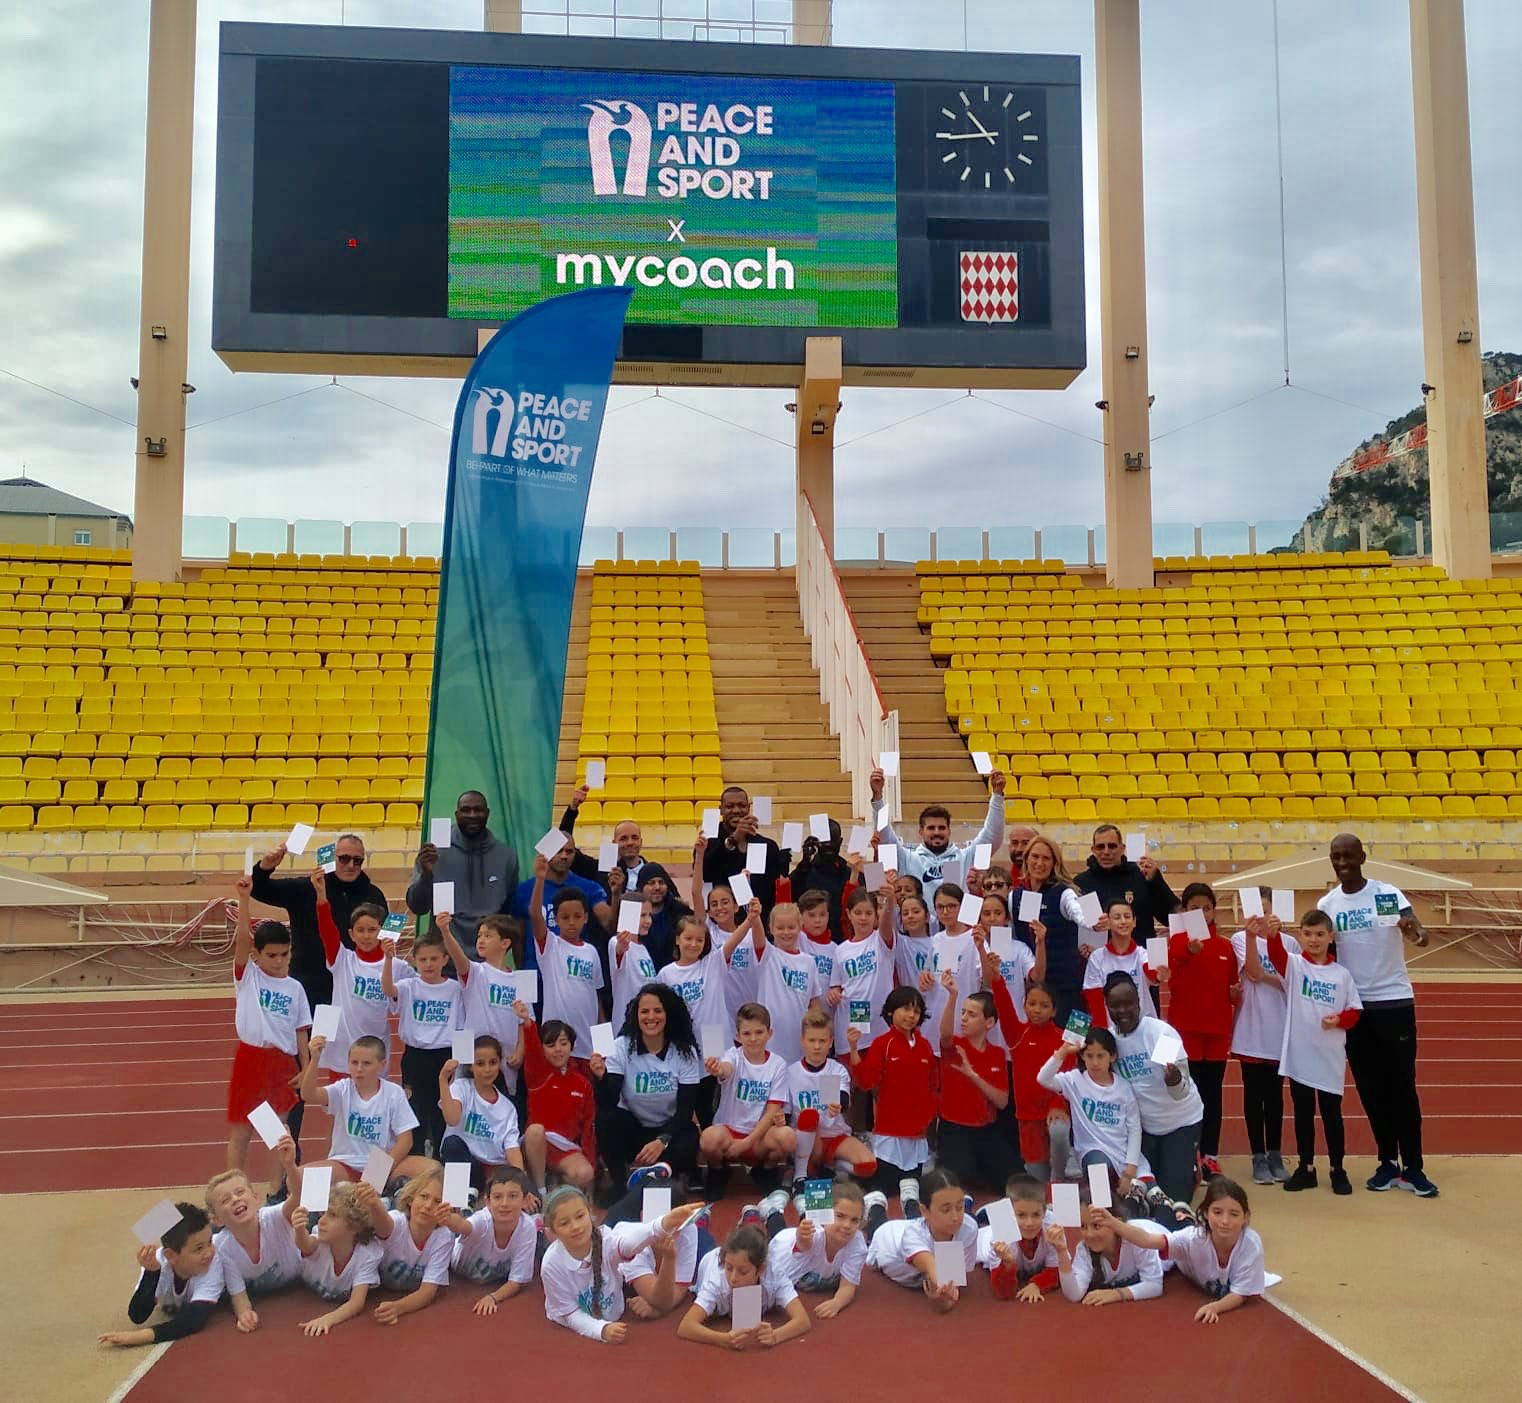 A number of Champions for Peace demonstrated the app at the Stade Louis II ©Twitter